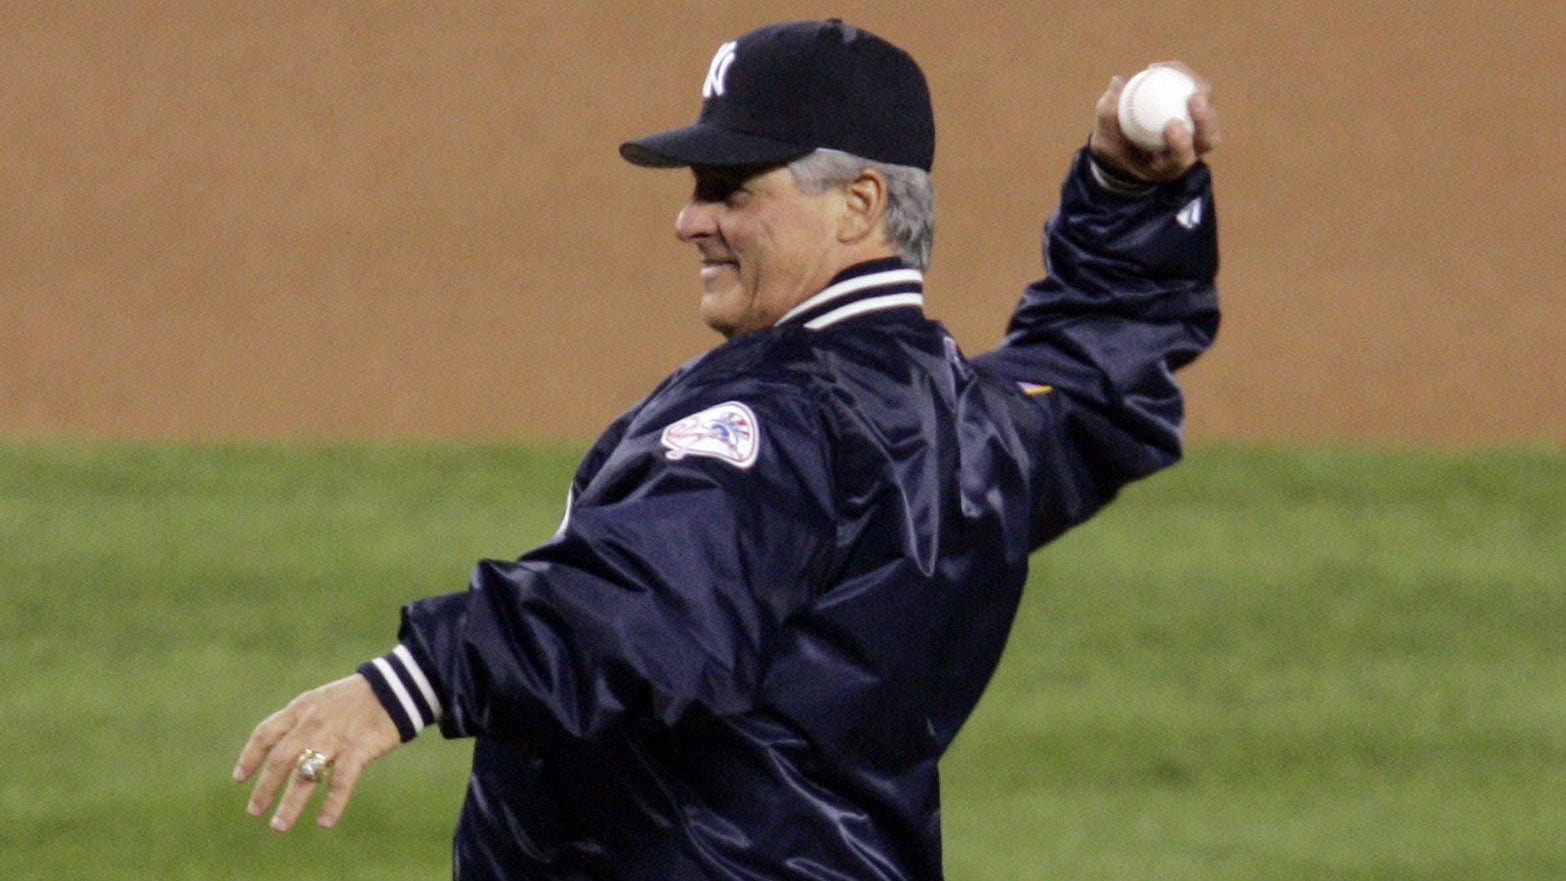 Yankees bring lucky charm Bucky Dent to Boston for WC game